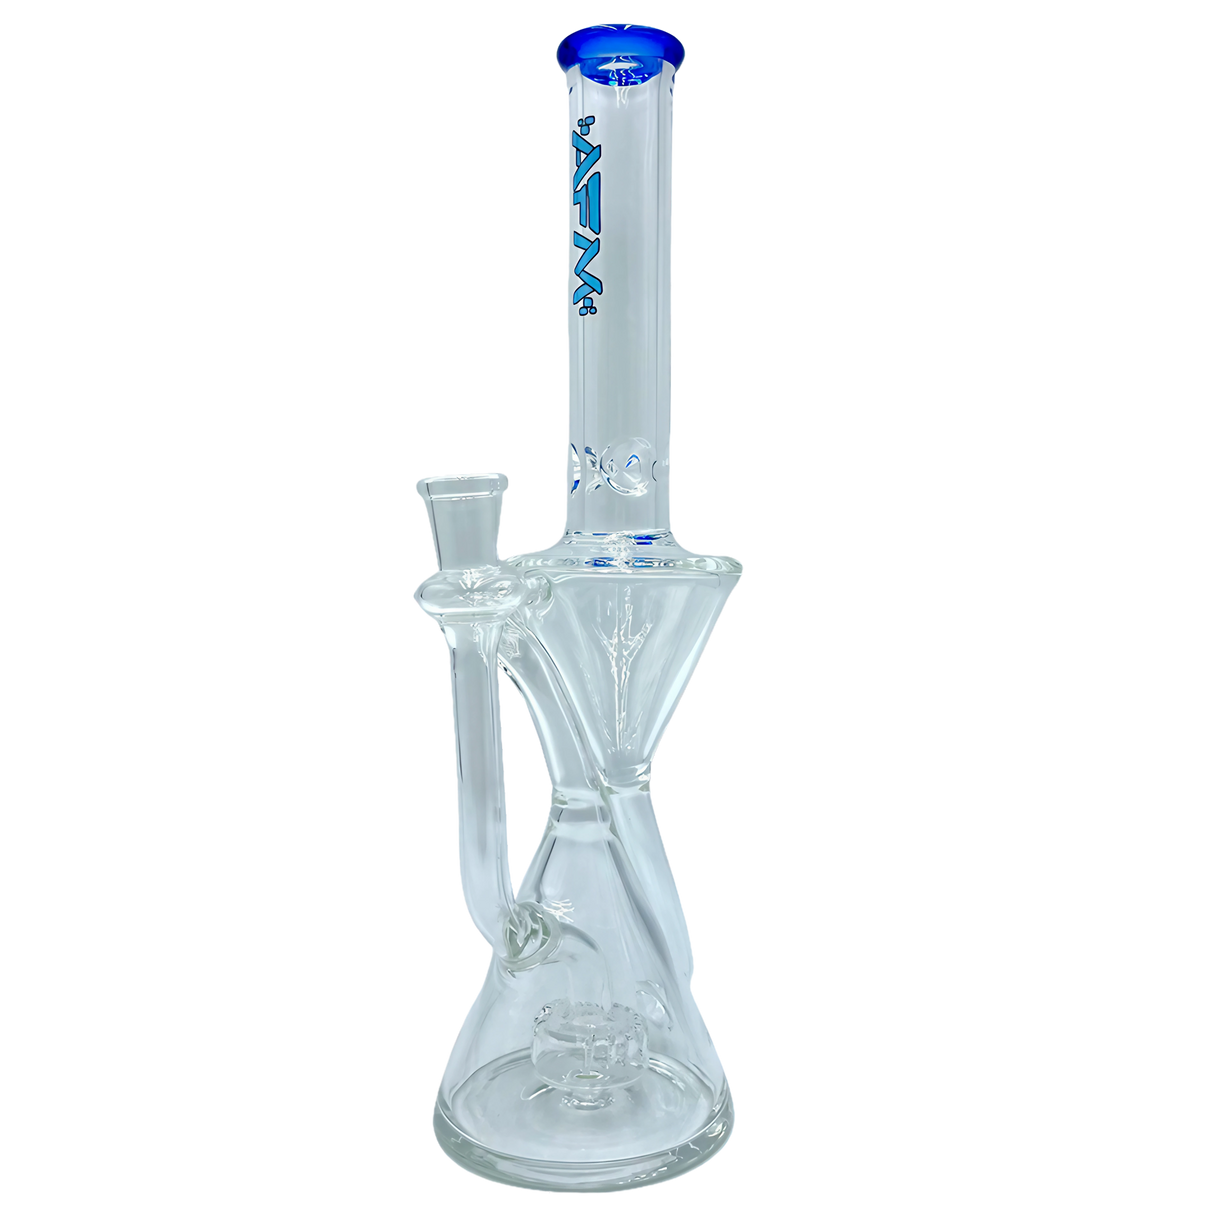 AFM The Time Recycler Rig - 12" in Blue with Showerhead Percolator - Front View